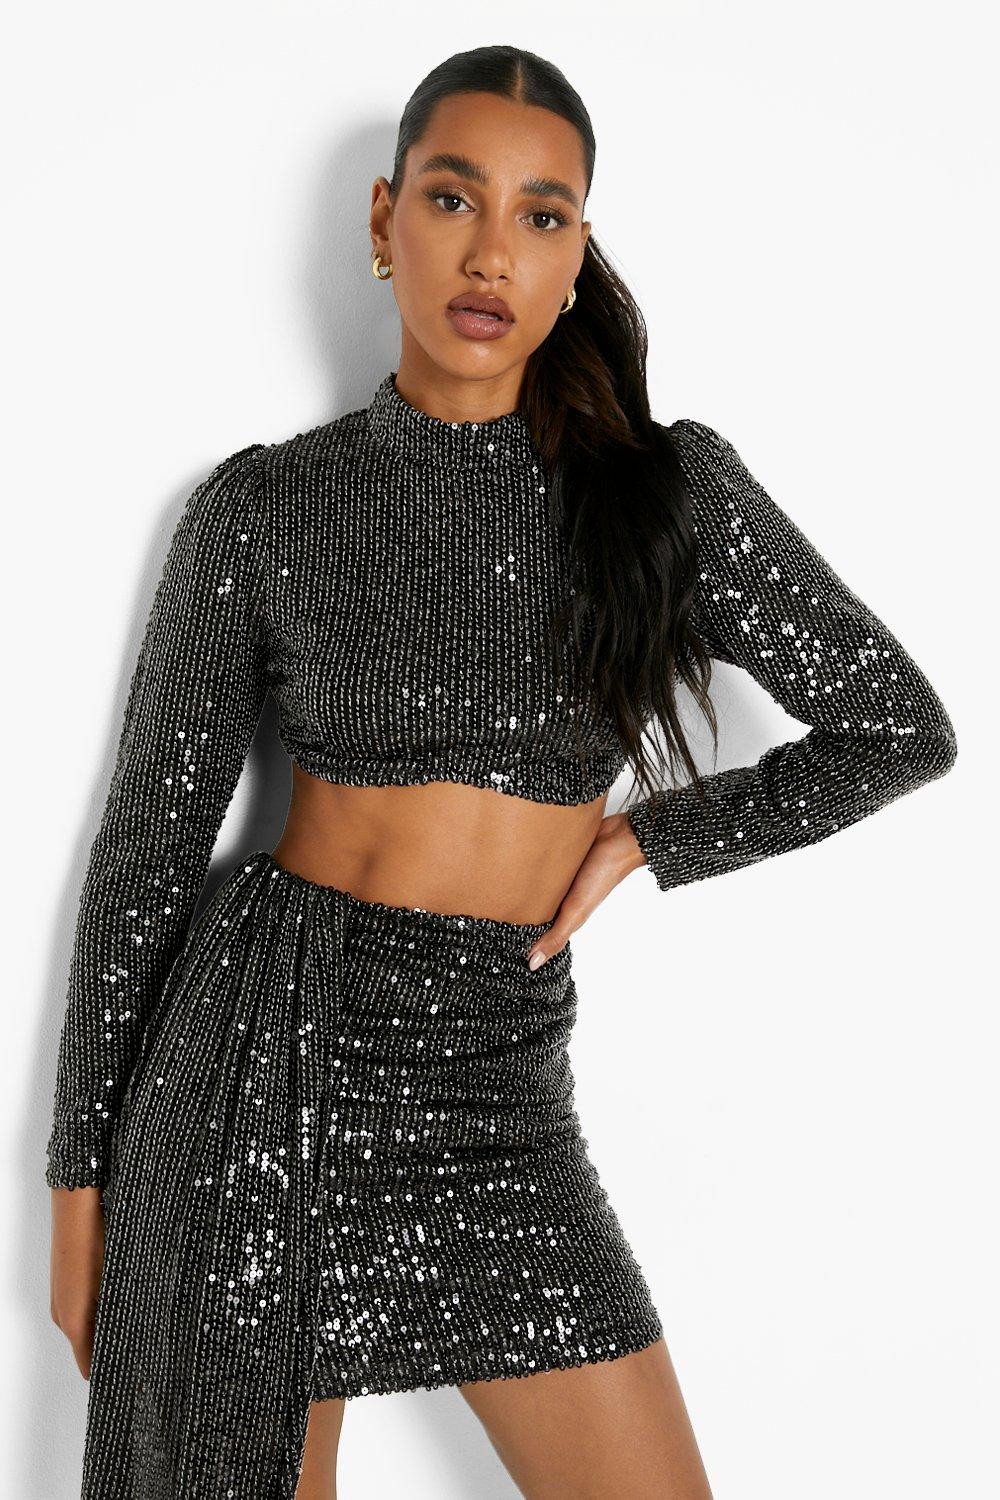 Sequin Tops | Glitter ☀ Sparkly Tops ...